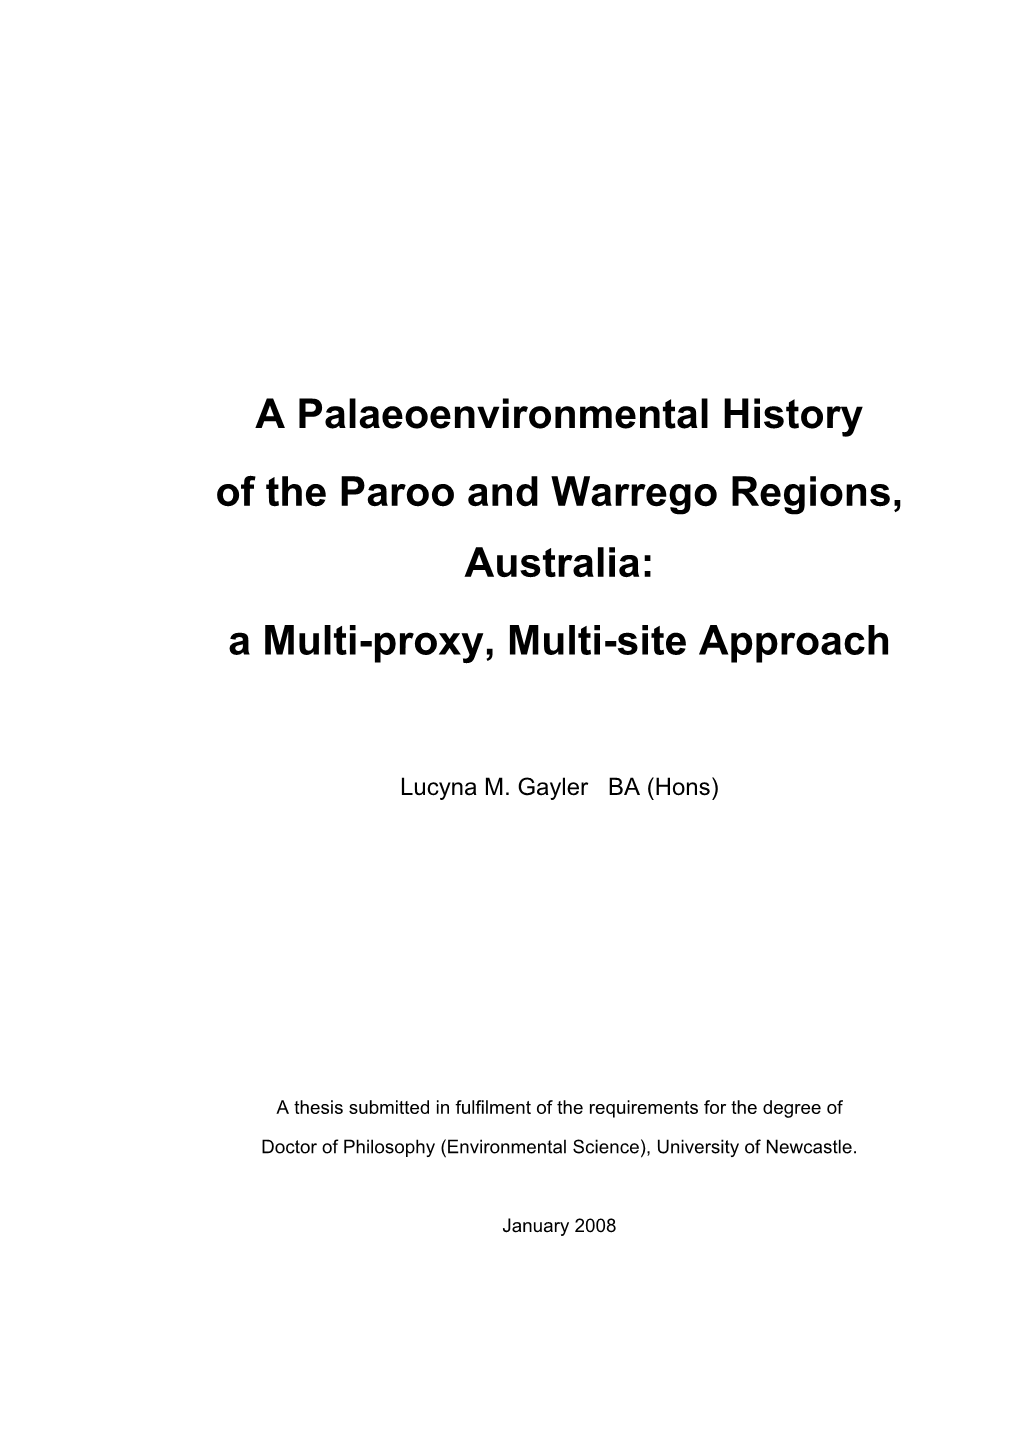 A Palaeoenvironmental History of the Paroo and Warrego Regions, Australia: a Multi-Proxy, Multi-Site Approach